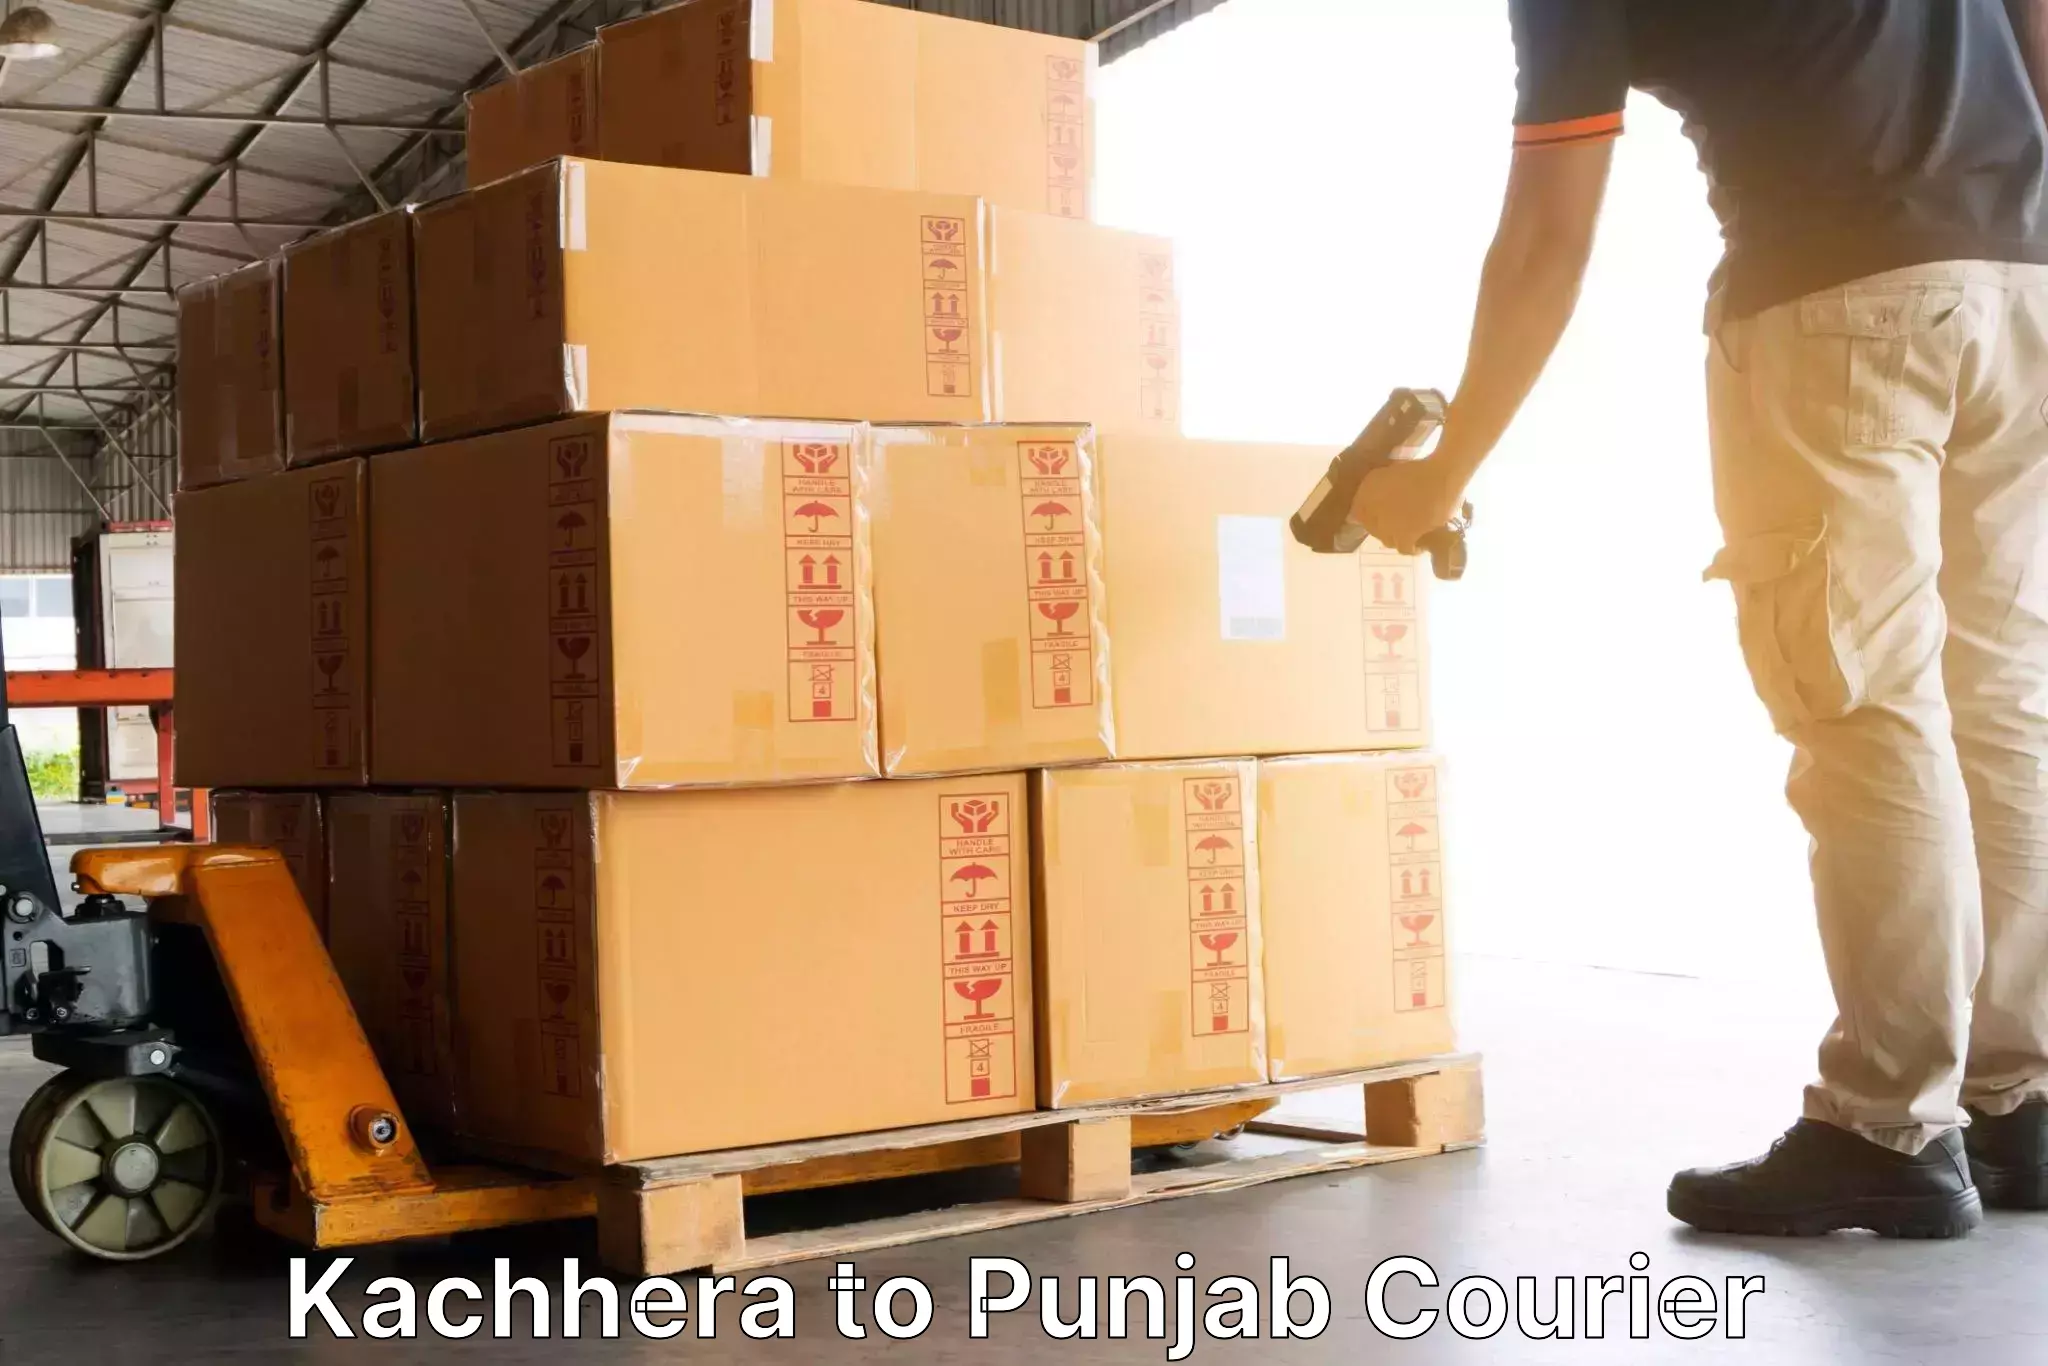 Easy access courier services in Kachhera to Moga